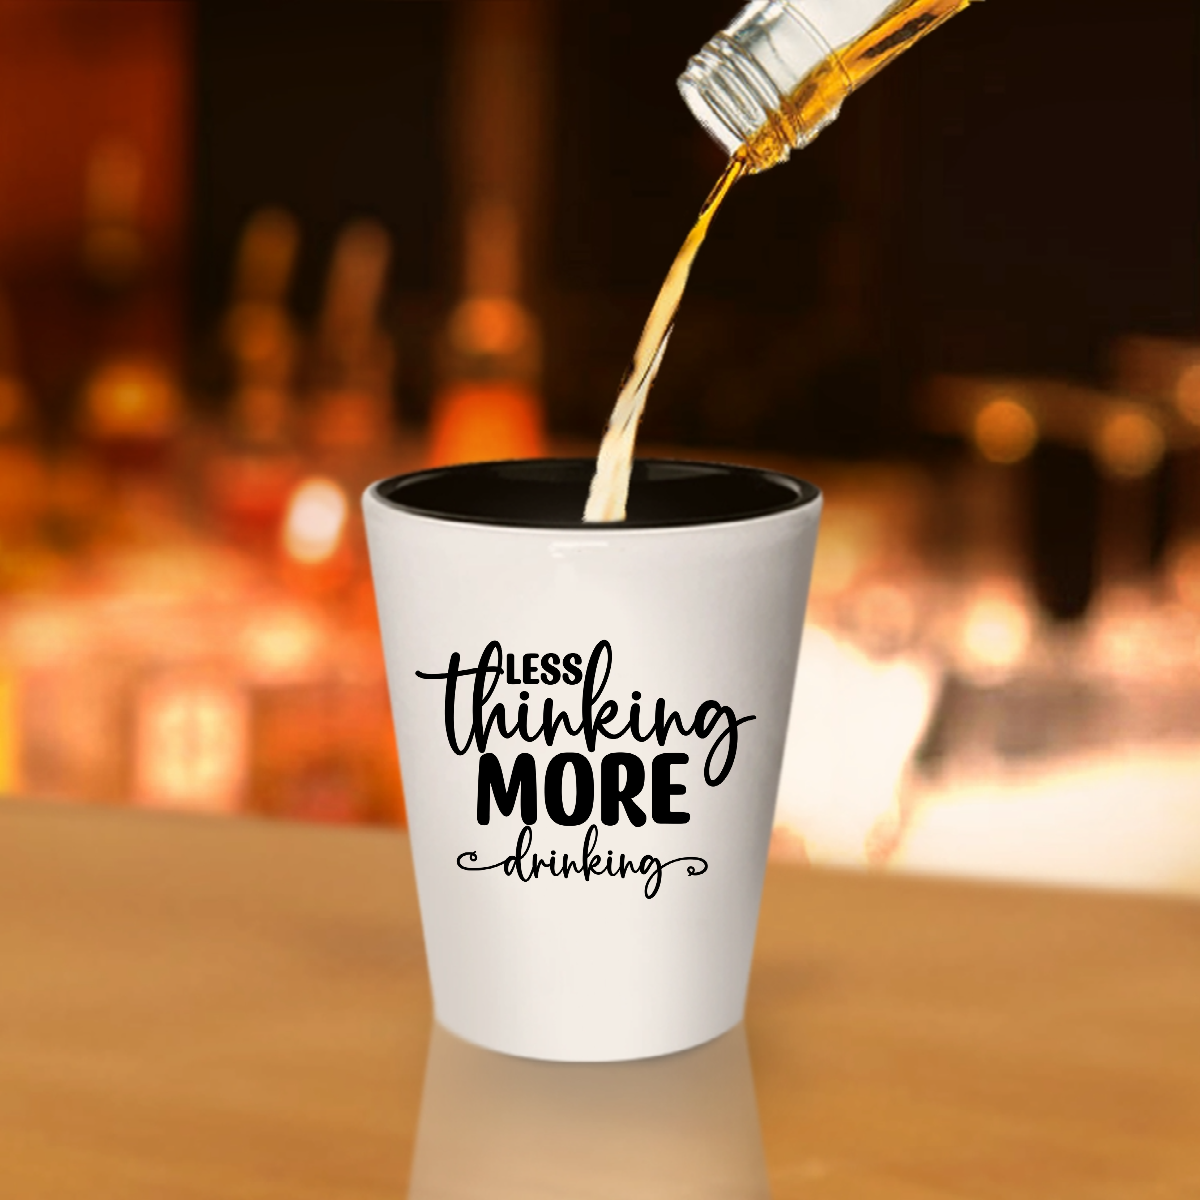 Less Thinking More Drinking - Shot Glass